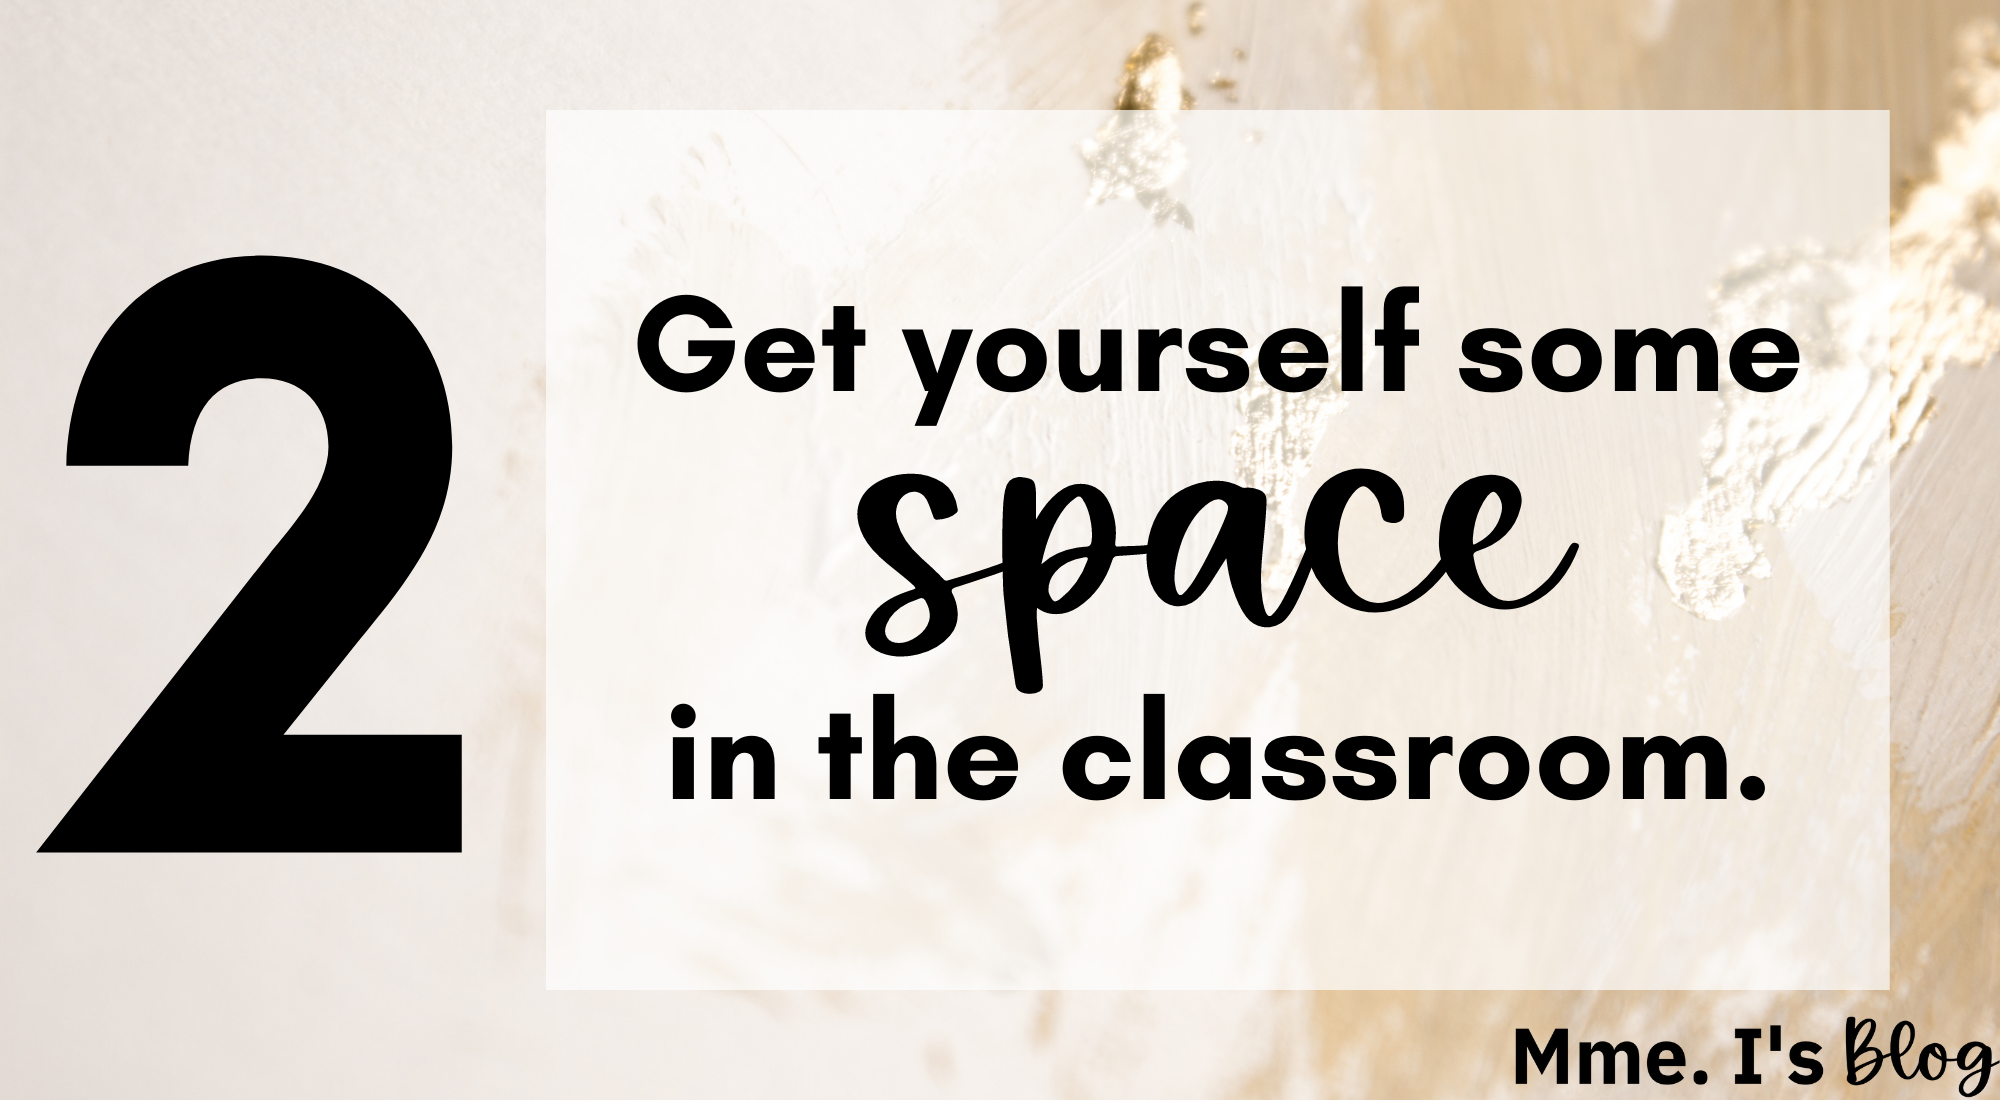 Get yourself some space in the classroom.